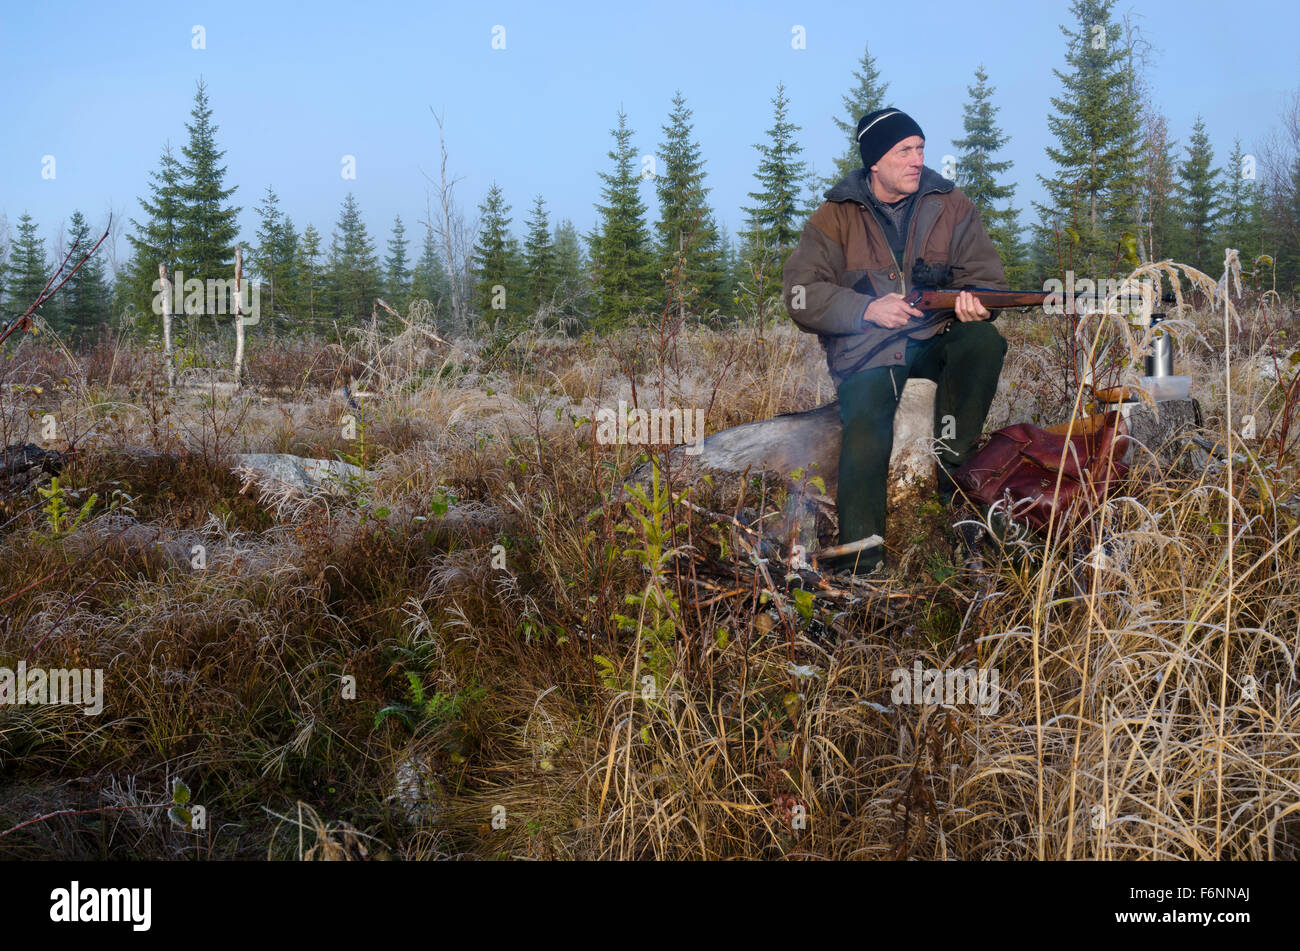 Moose hunter sitting on a stump with a litle fire in front holding his rifle pointing to the left. Stock Photo